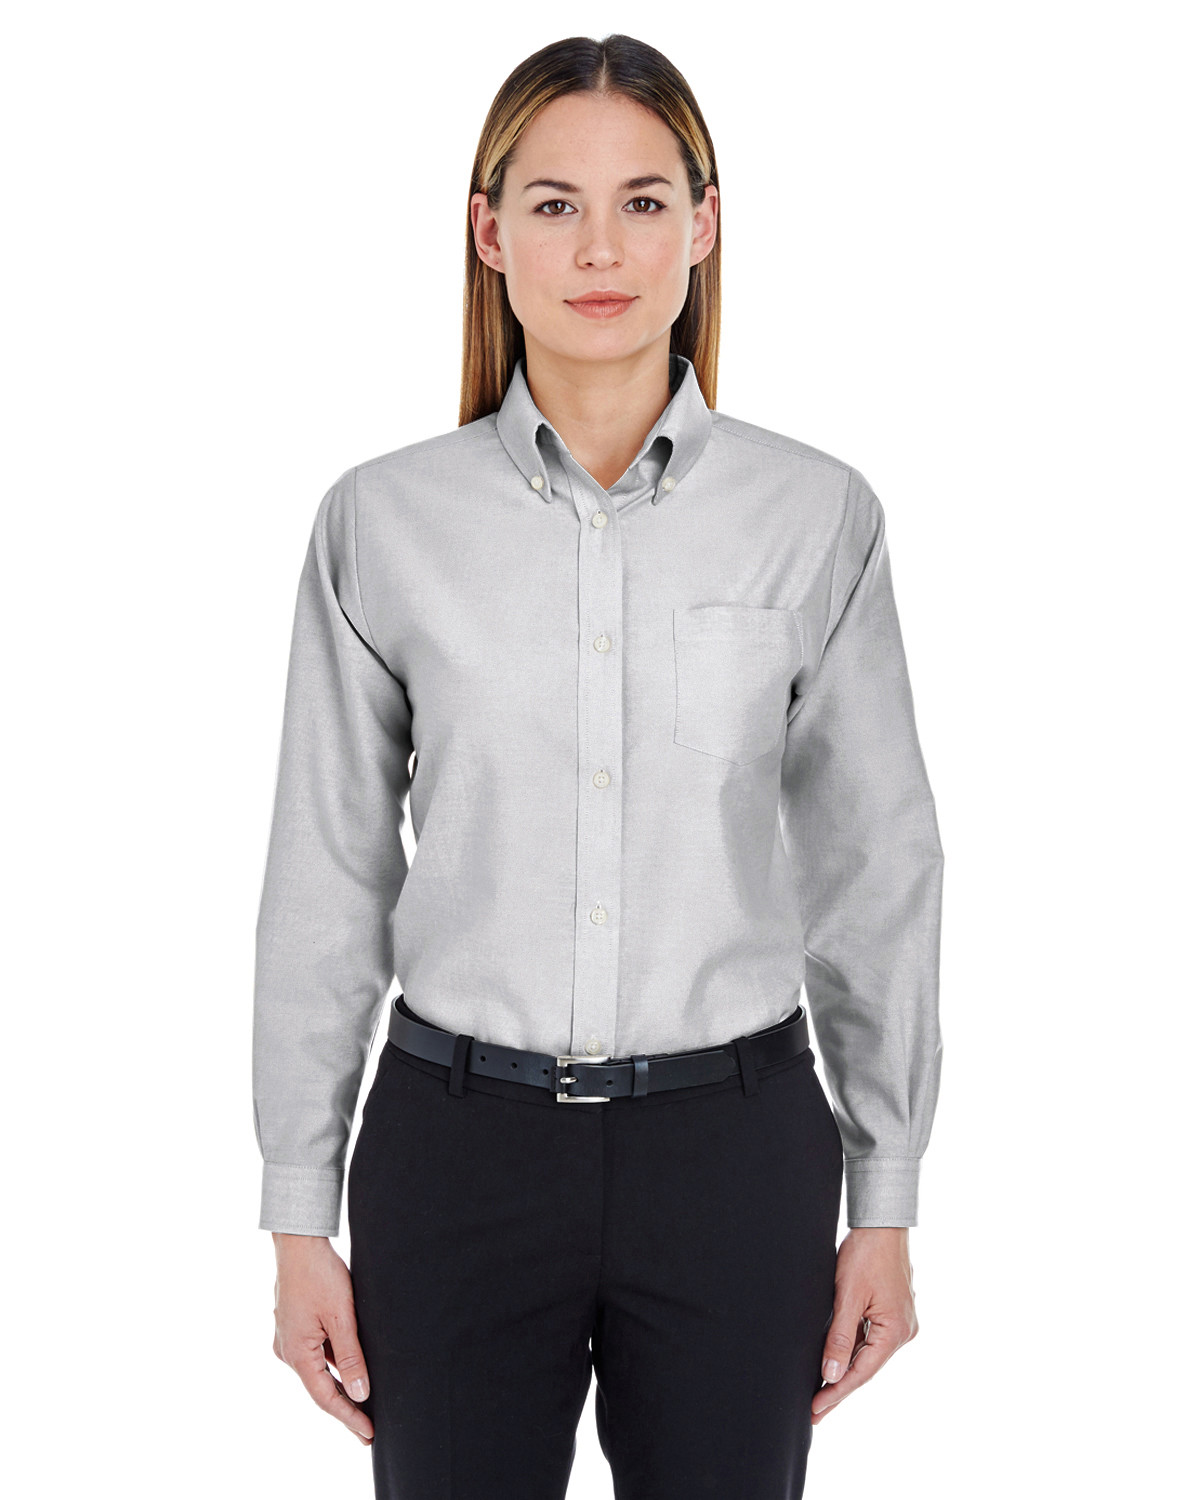 ULTRACLUB 8990 Womens Long Sleeve Button Down Classic Wrinkle Resistant Oxford Shirt With Pocket